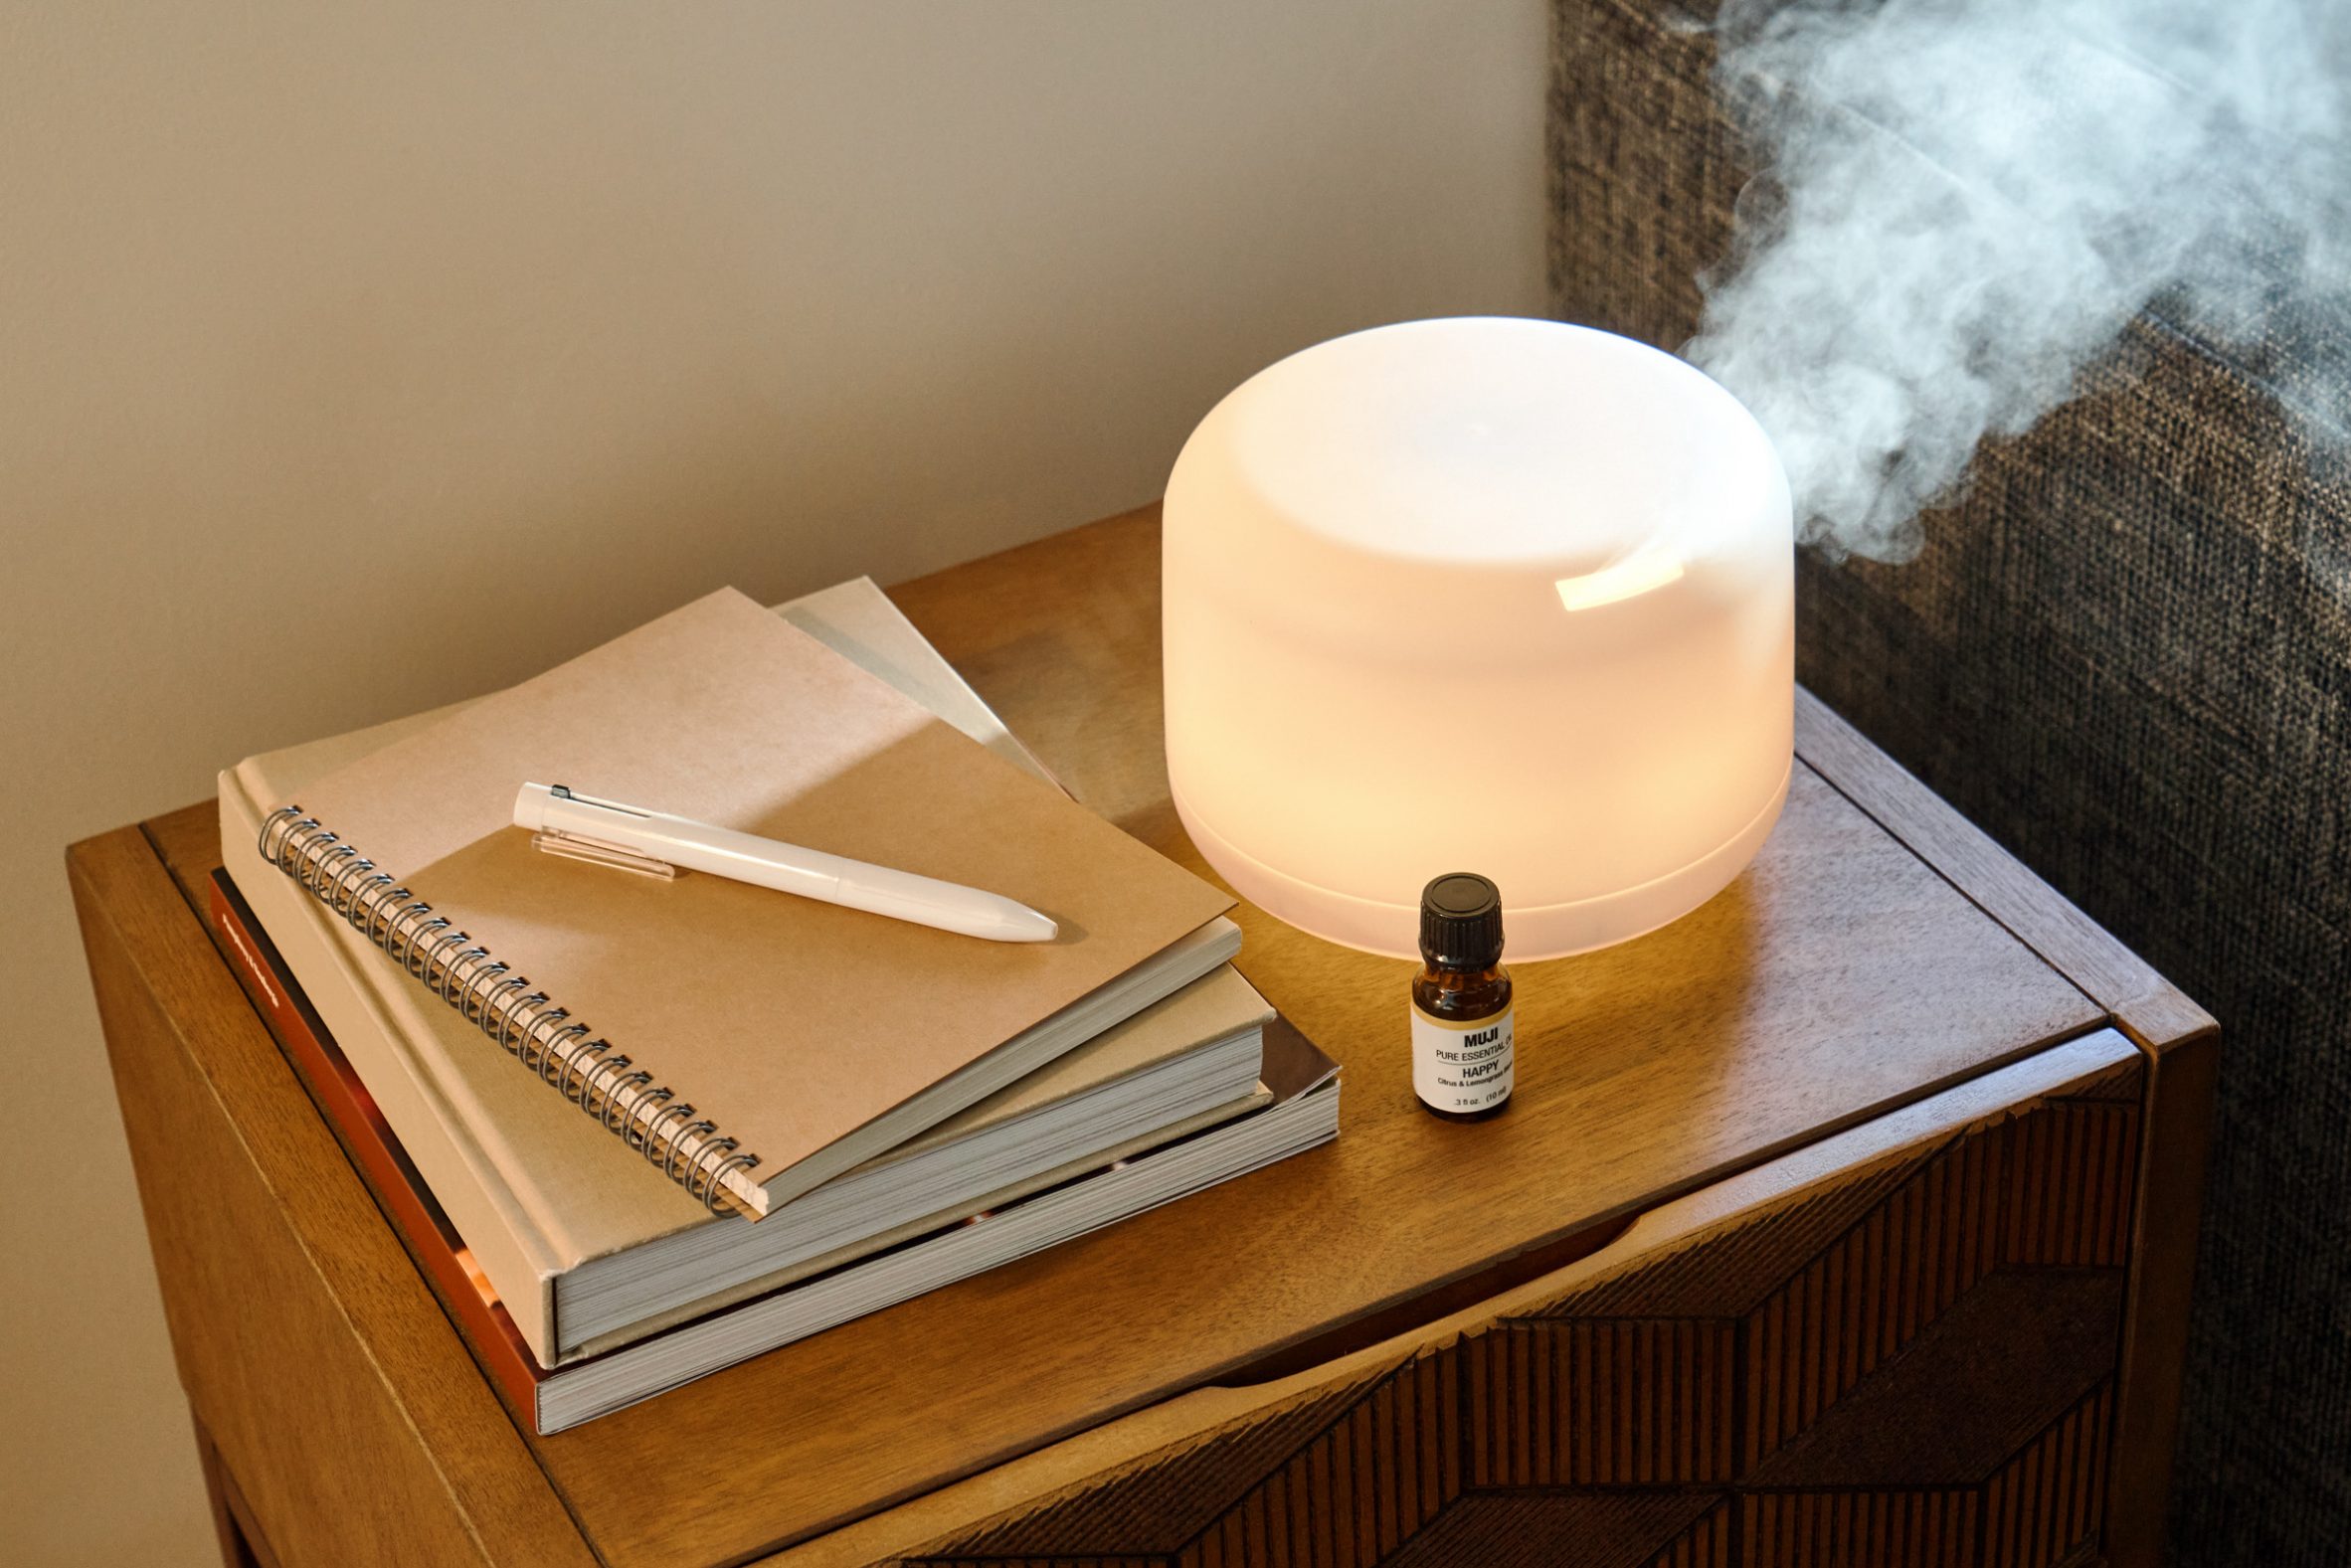 The kit features Muji favourites such as diffusers